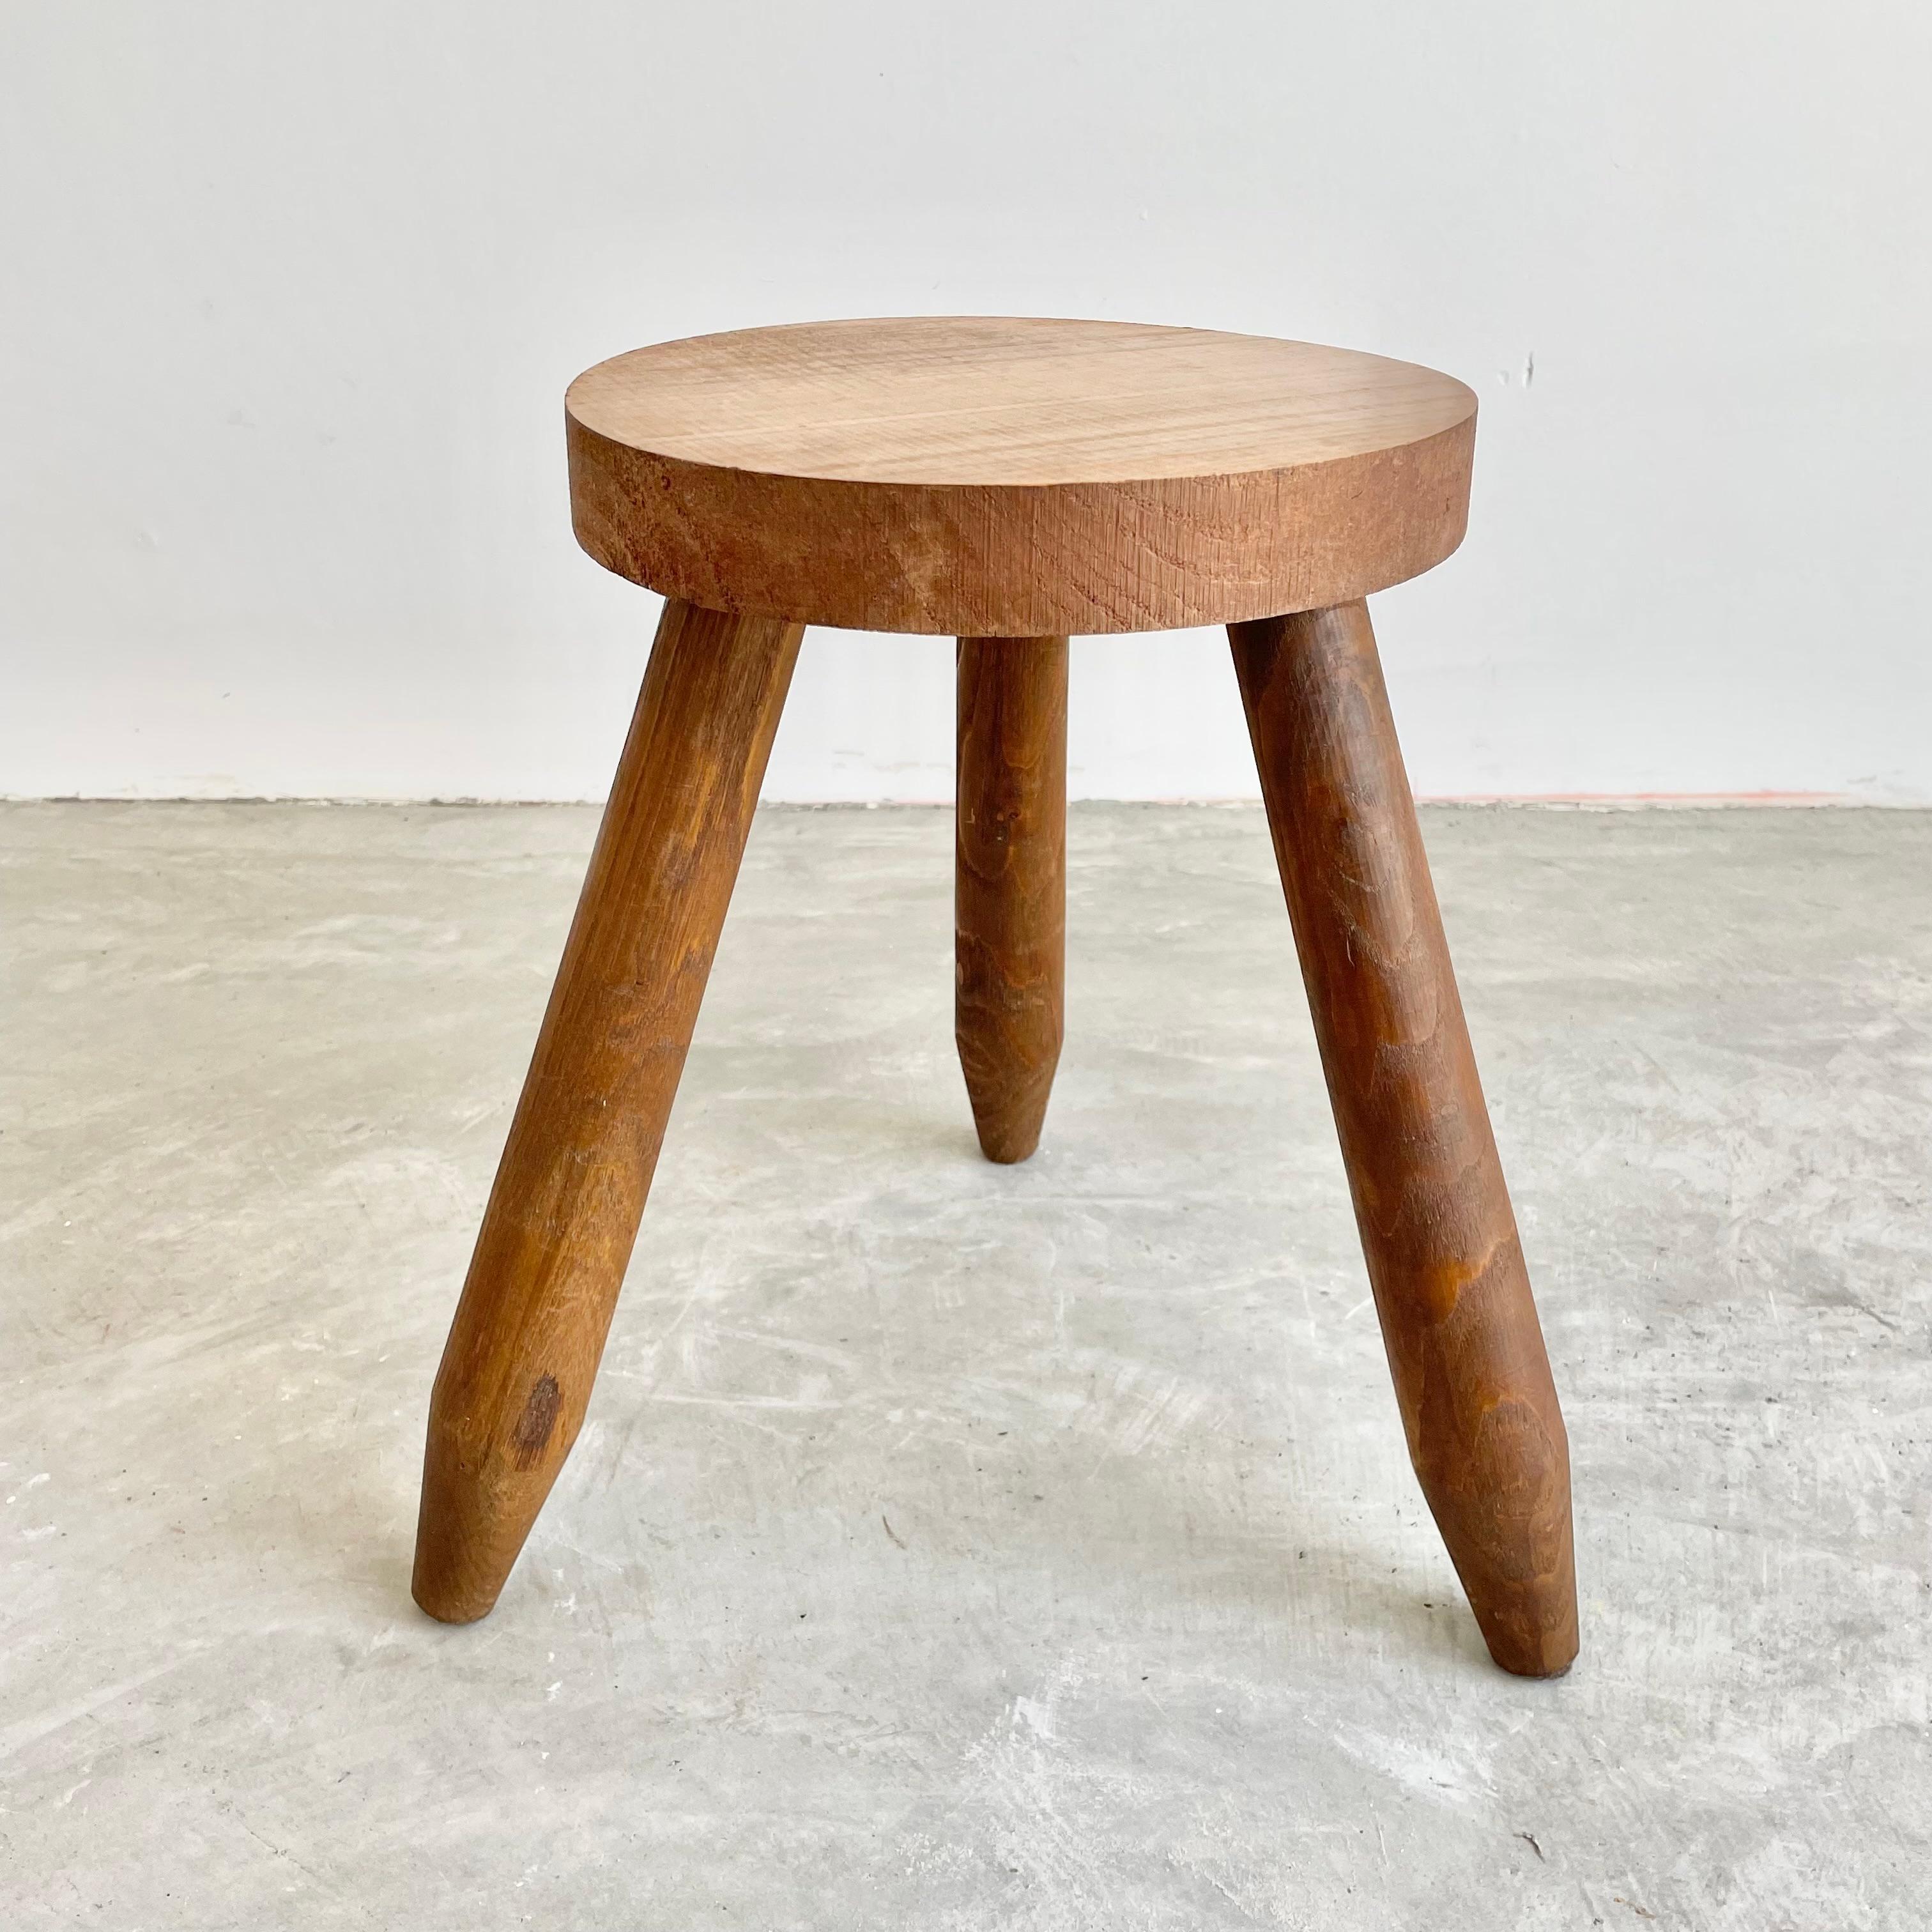 Minimalist wooden tripod stool made in France, circa 1960s. Substantial and chunky, this stool has 3 club legs that screw into base. Raw grain to the wood which gives the piece nice patina and color. Perfect for books or objects.
      